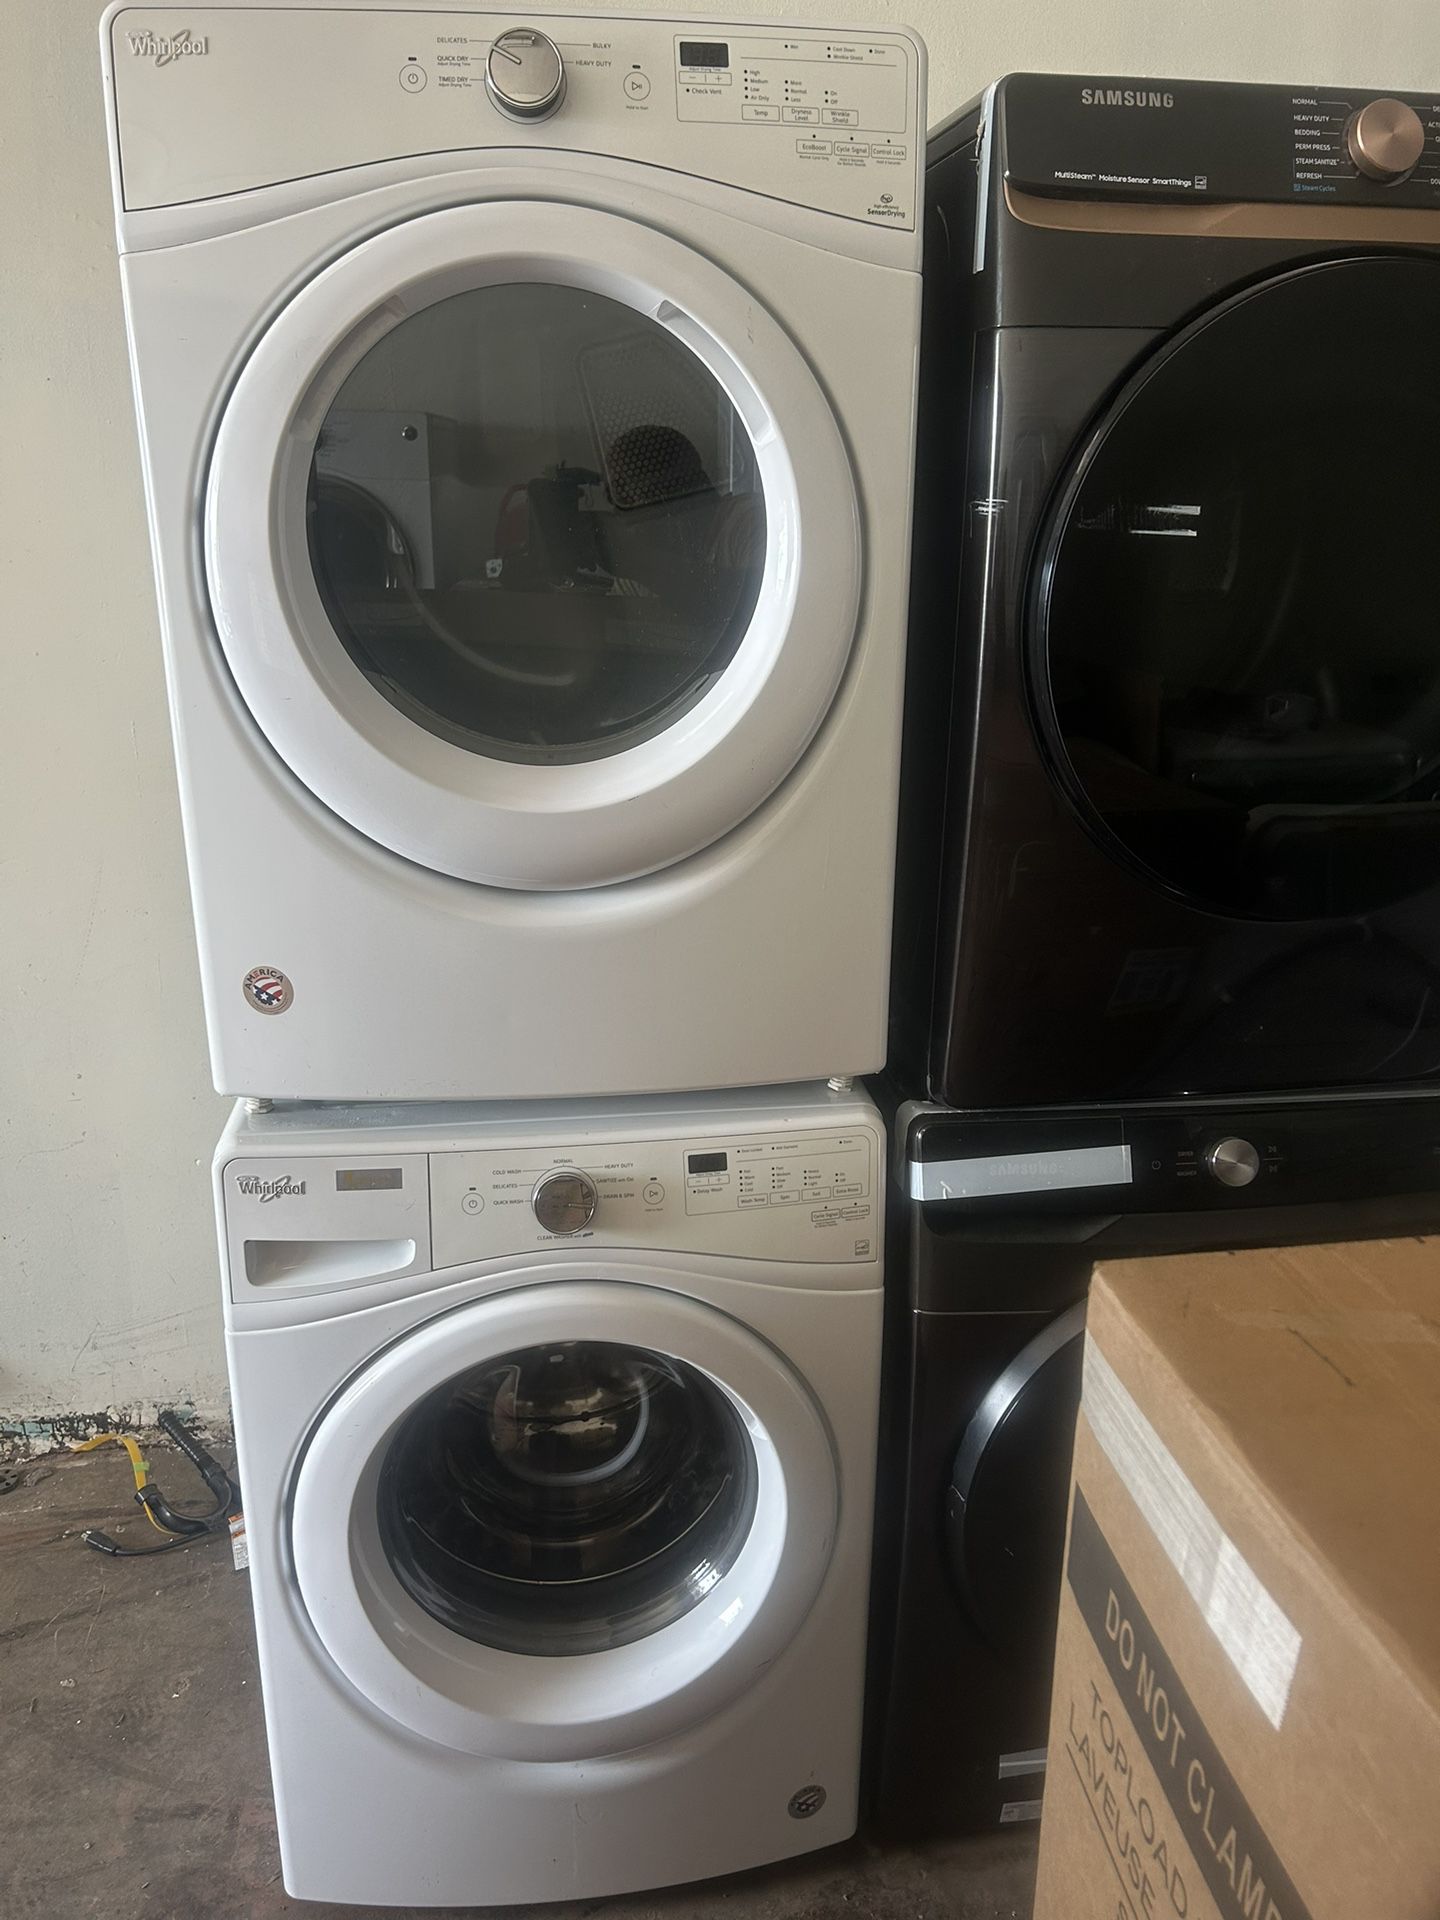 NICE BIG WHIRLPOOL FRONTLOAD WASHER DRYER SET.$550 Delivered Installed.$500 Picked Up.4m Warranty